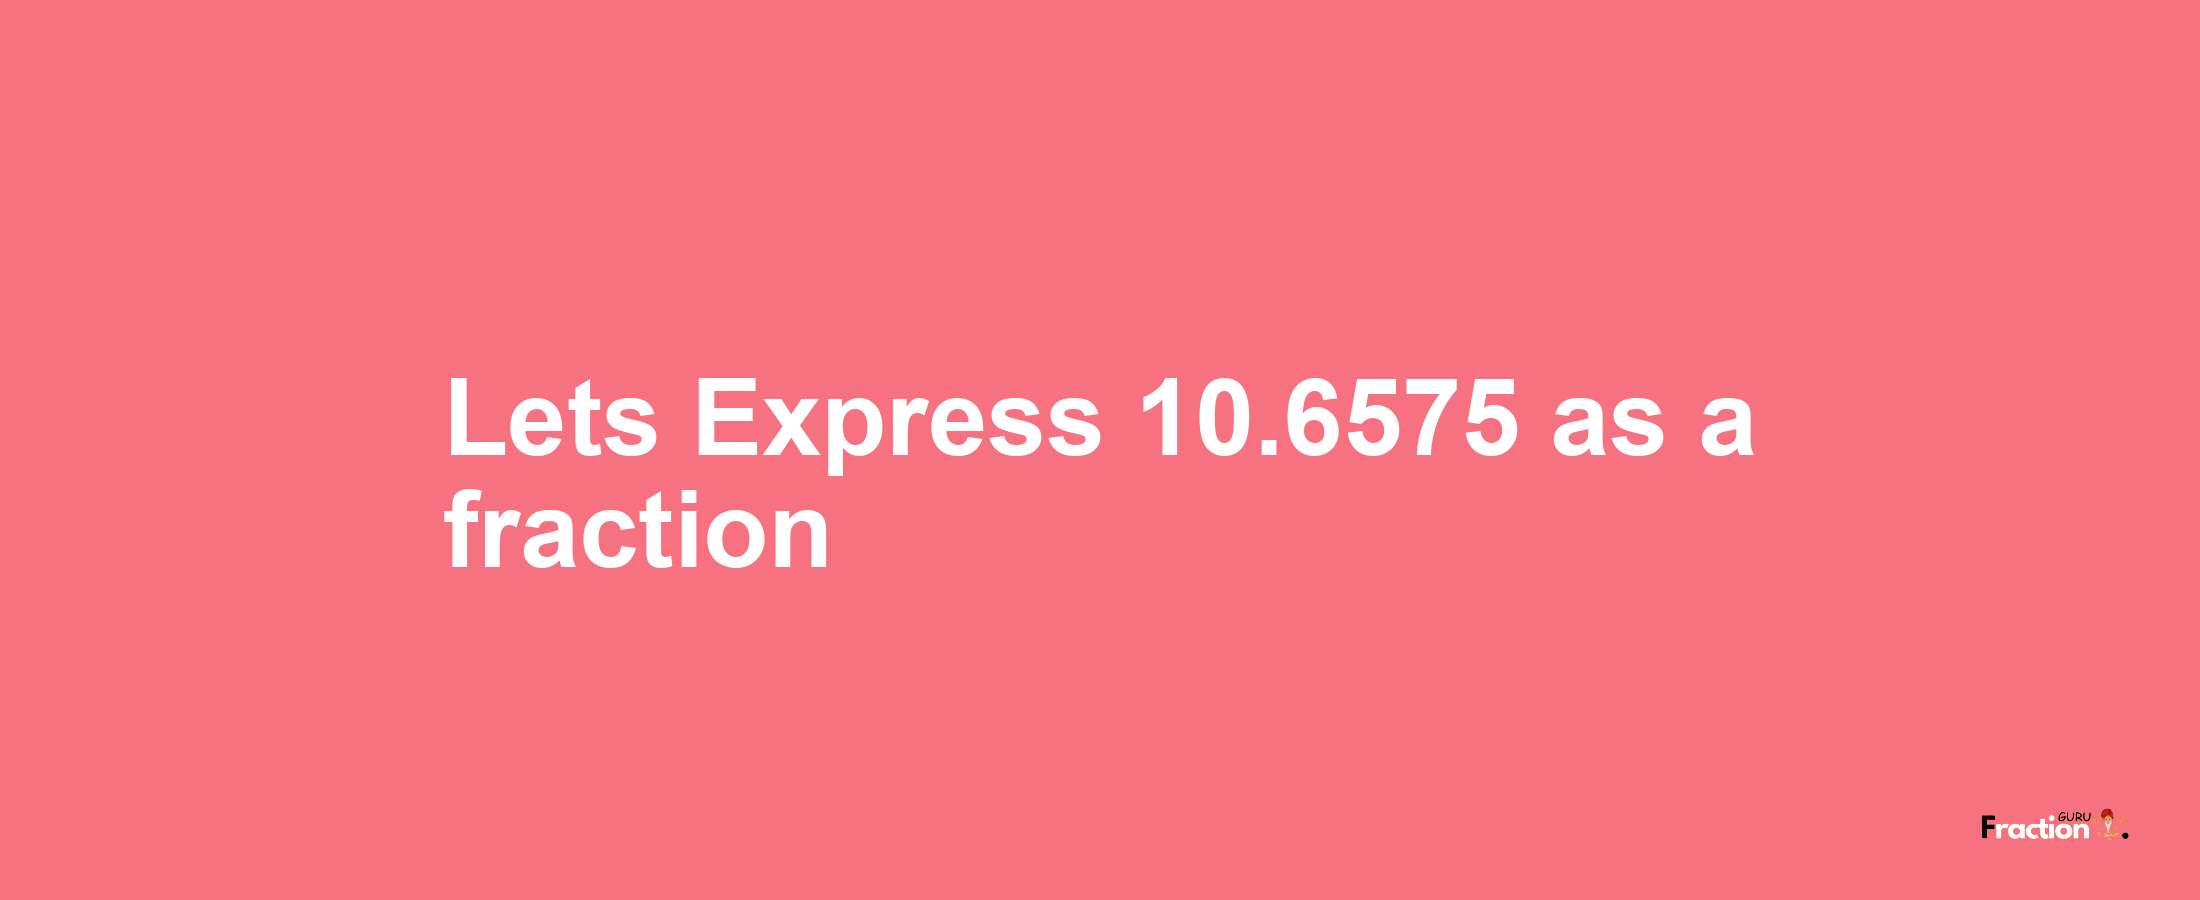 Lets Express 10.6575 as afraction